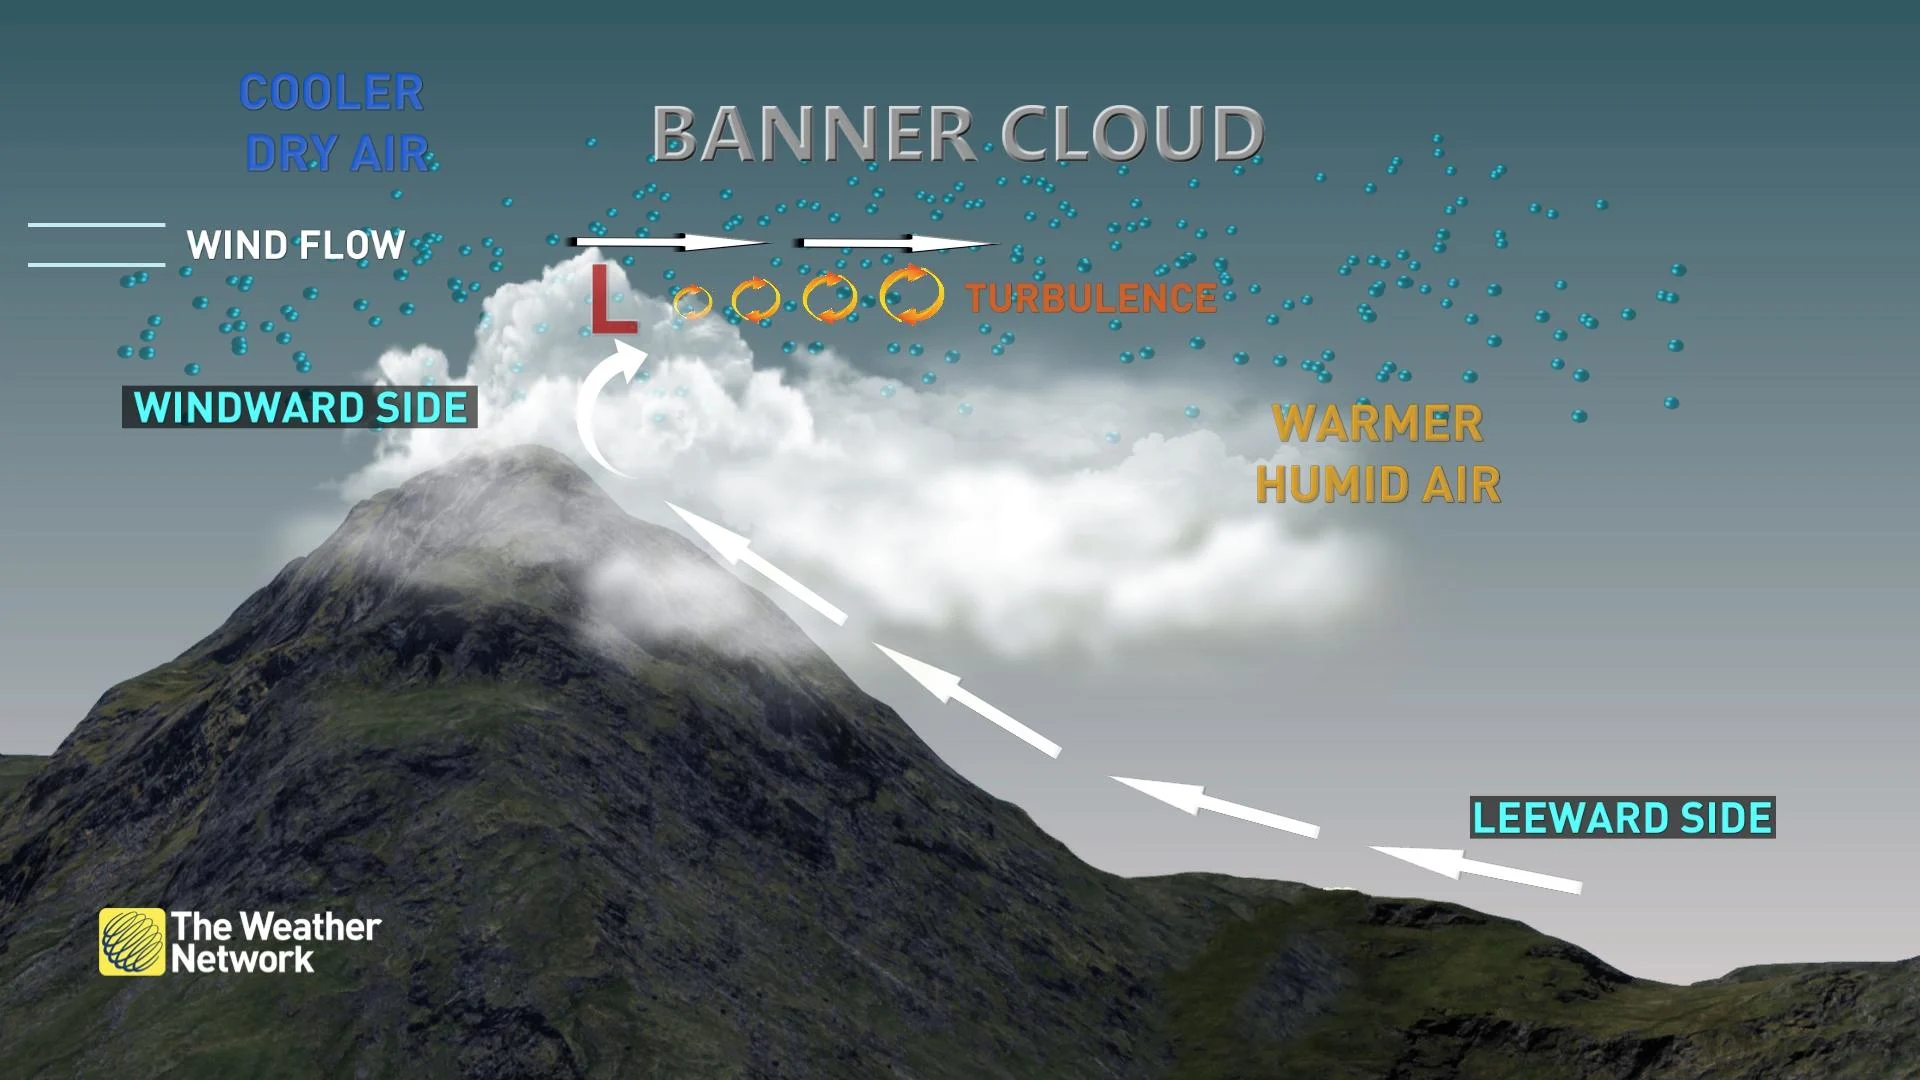 BannerCloud Formation